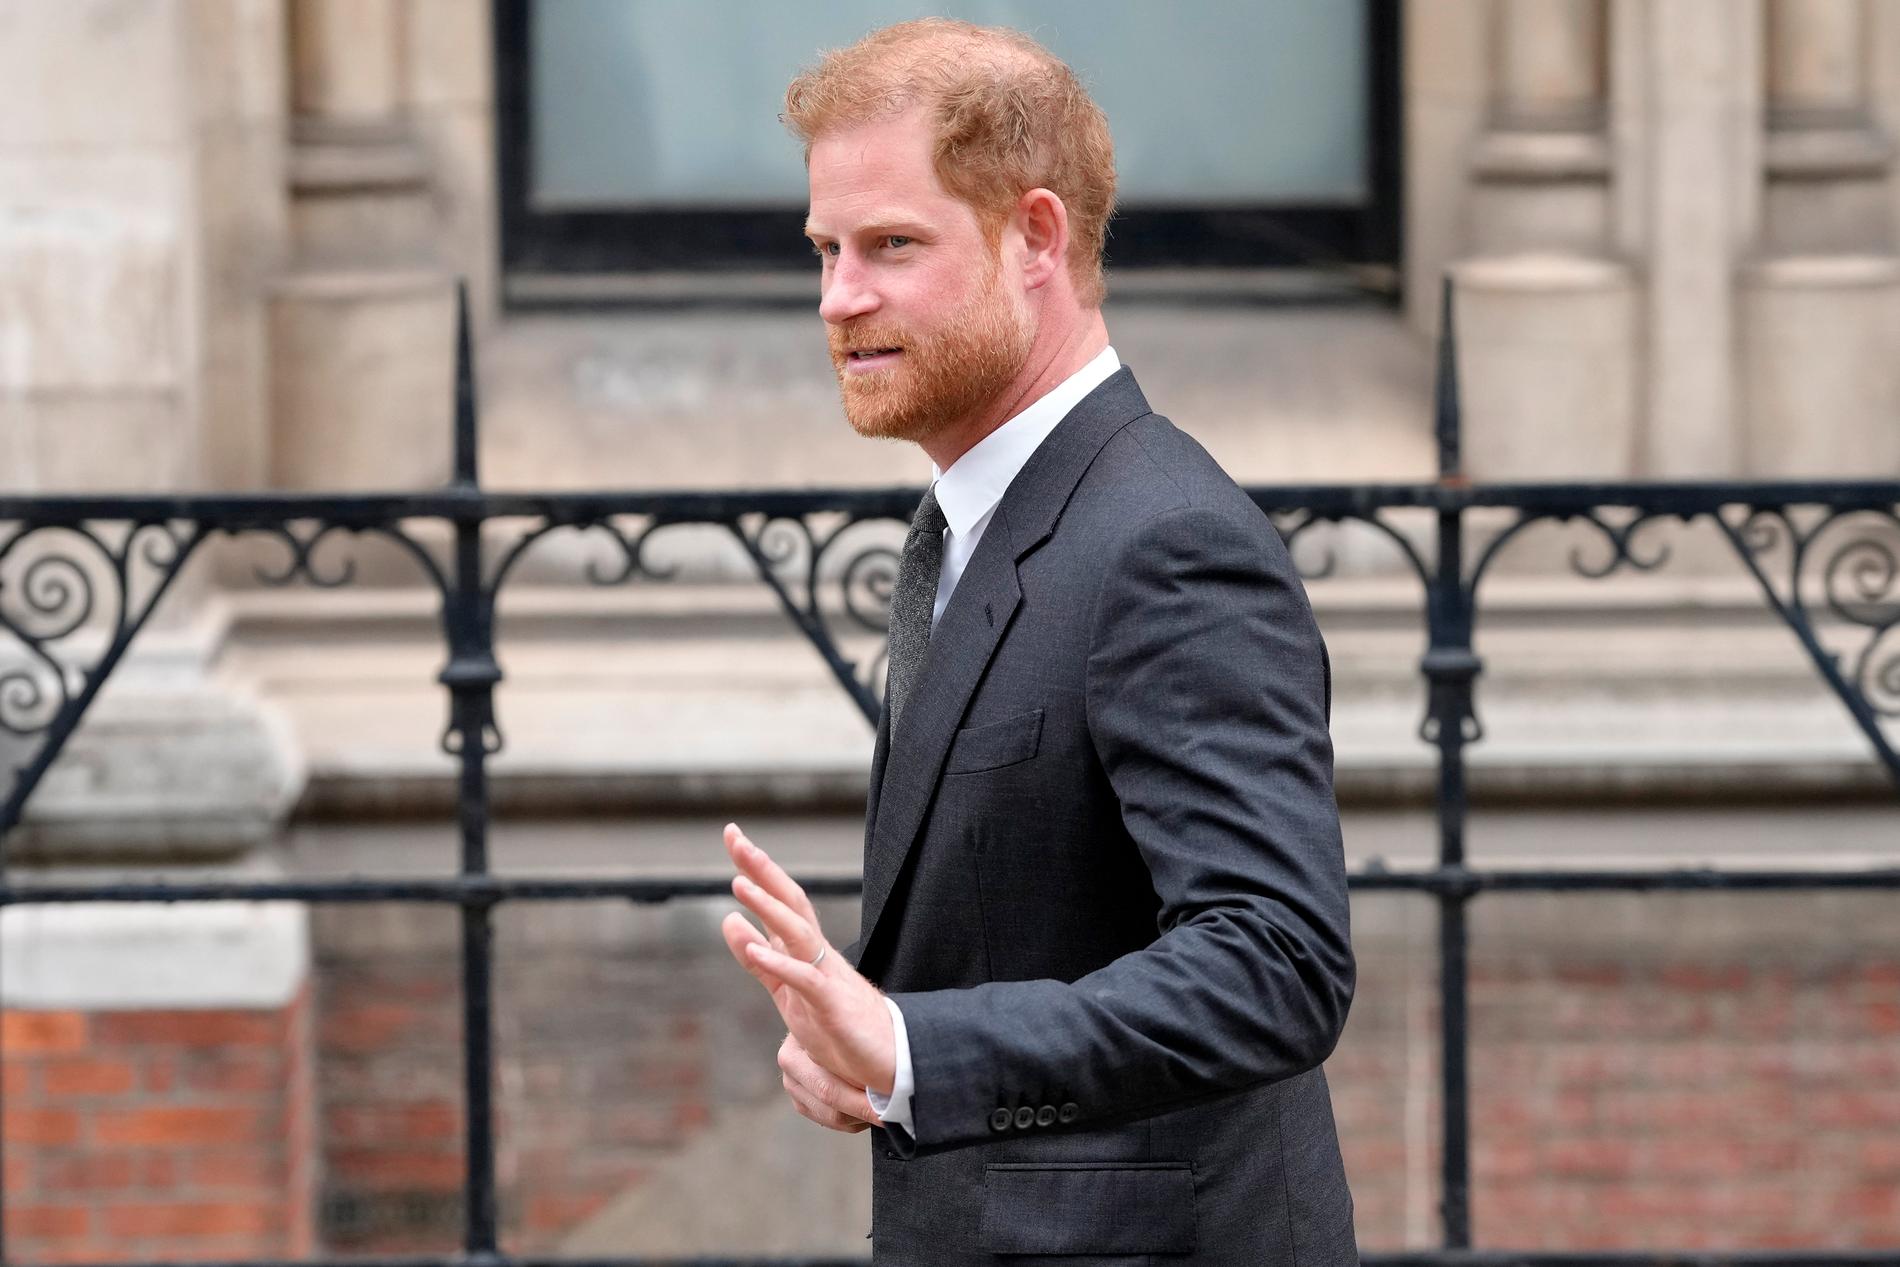 British tabloid publisher admits to illegally obtaining information on Prince Harry